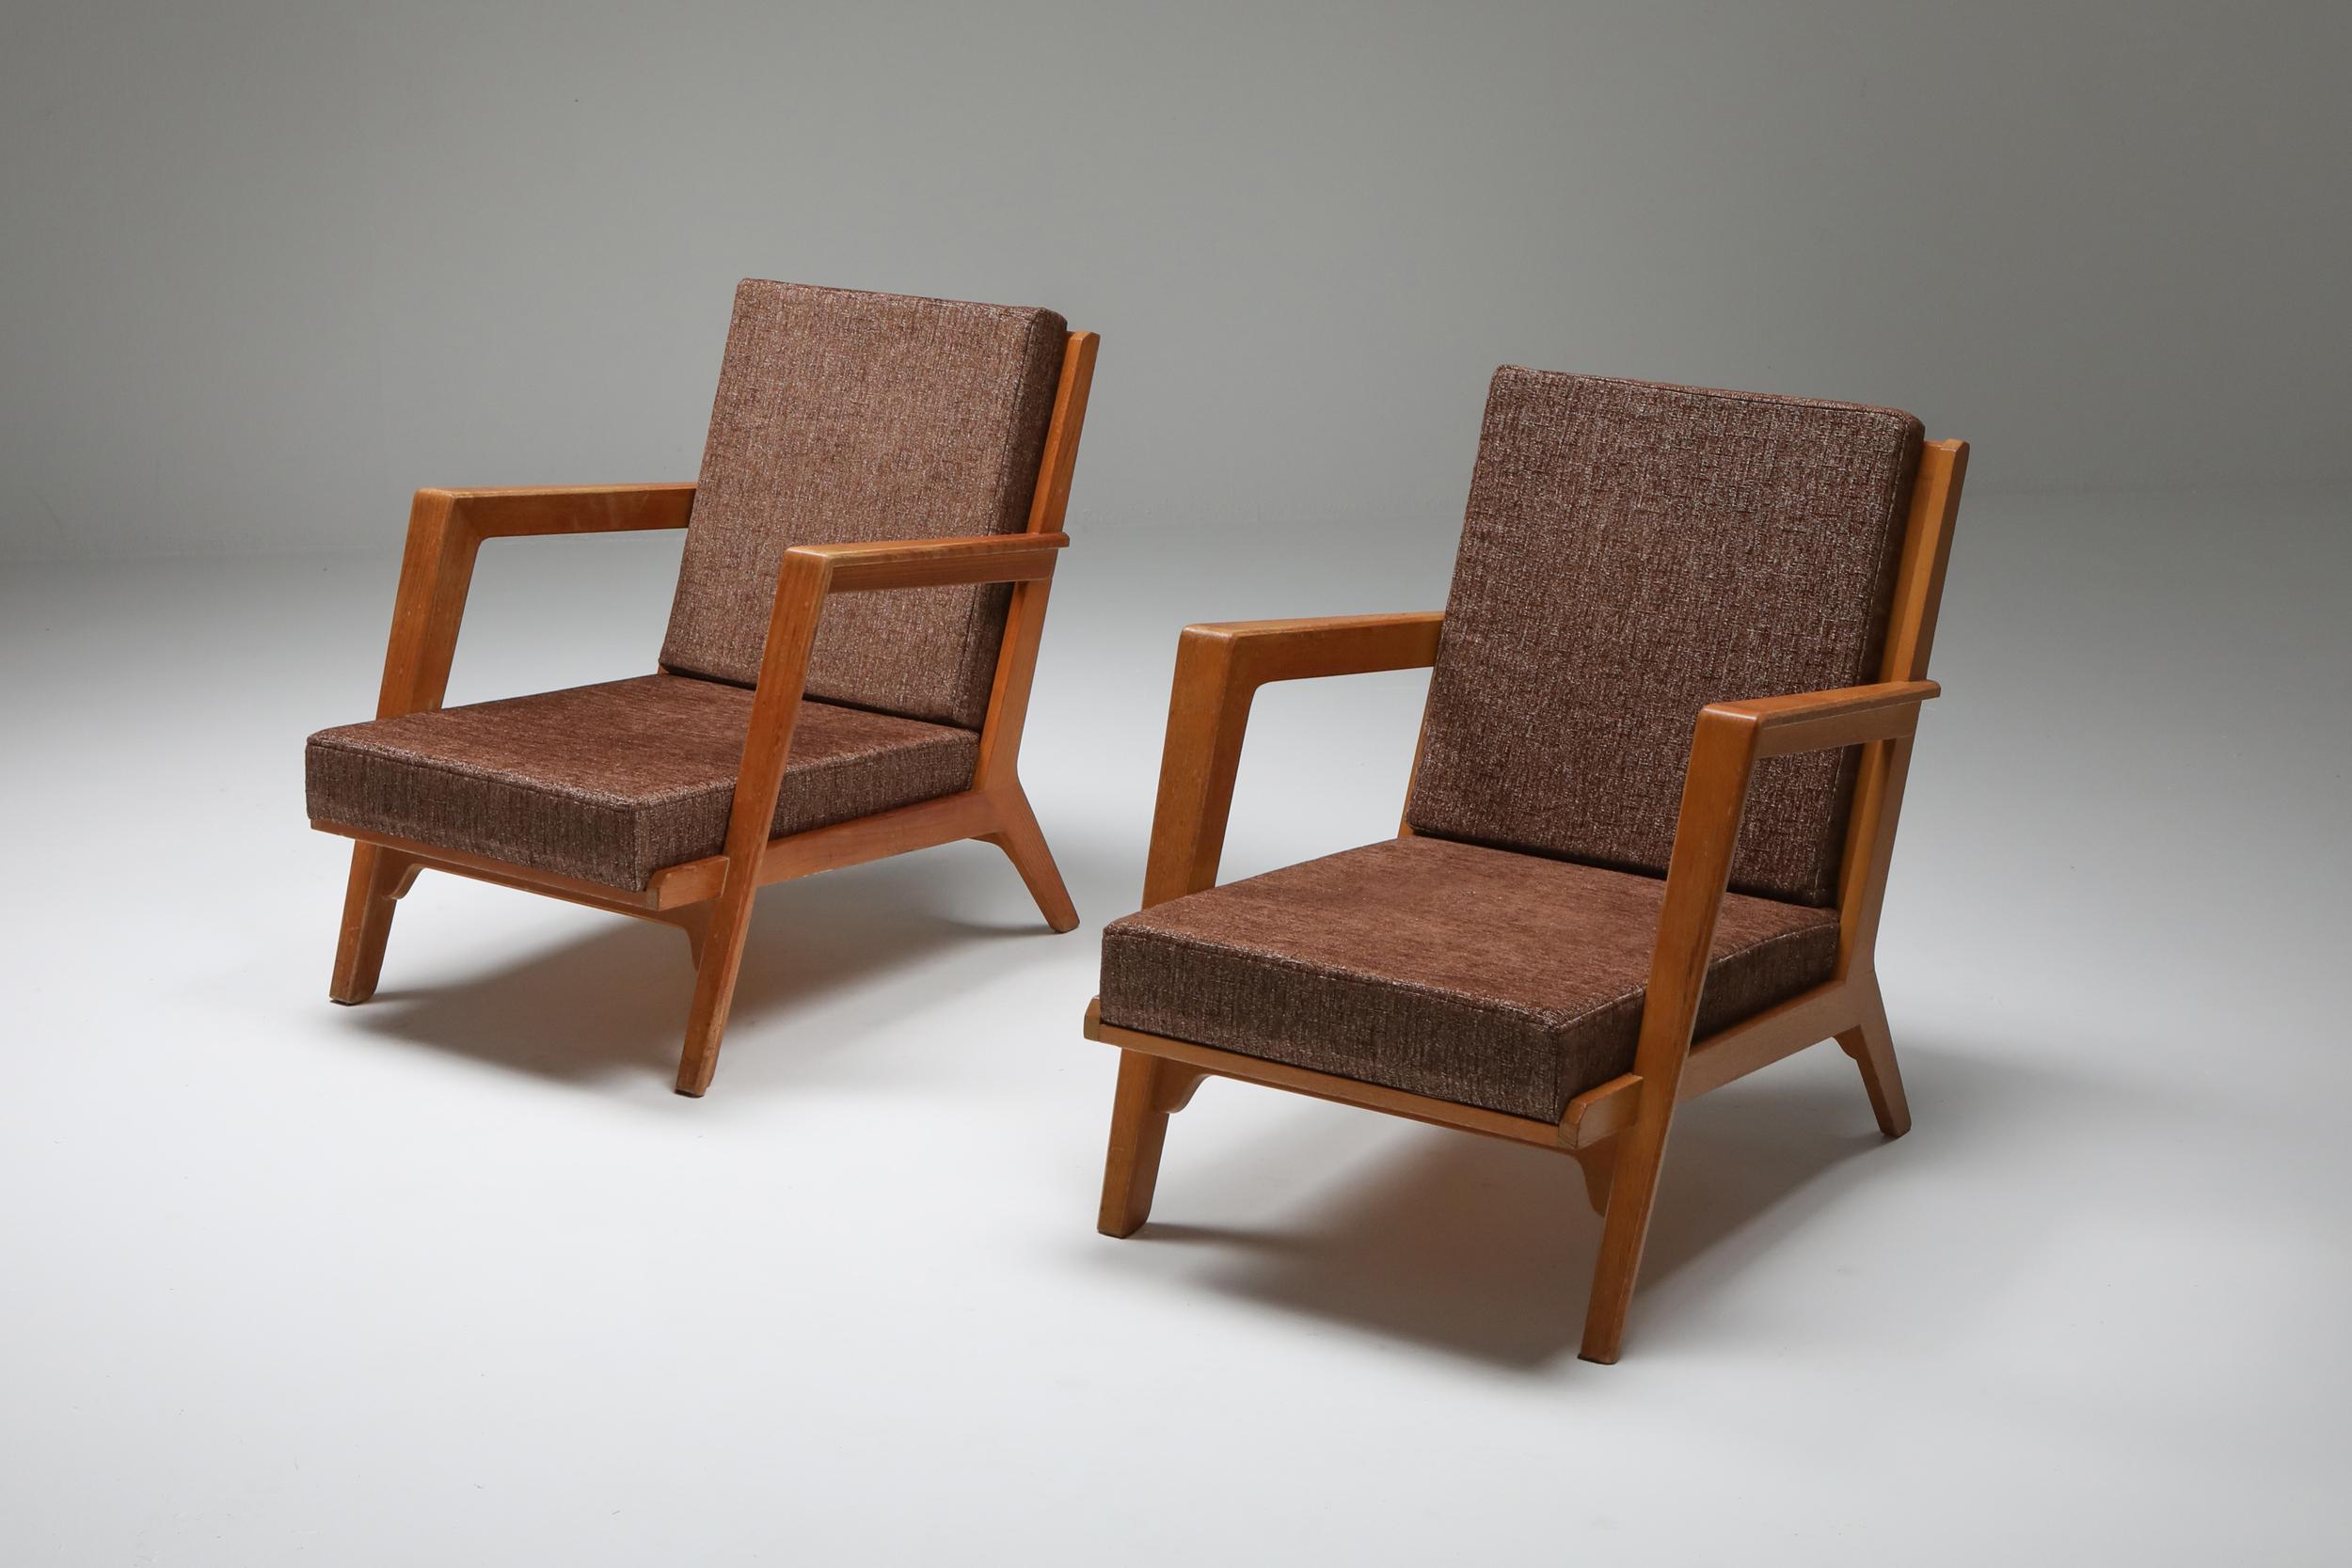 Elmar Berkovich, pair of lounge chairs, 1950, The Netherlands.

This is a super rare pair of chairs, original upholstery, teak frame with stunning details
Elmar Berkovich has quite a few pieces in Museum collections, like Stedelijk and Centraal